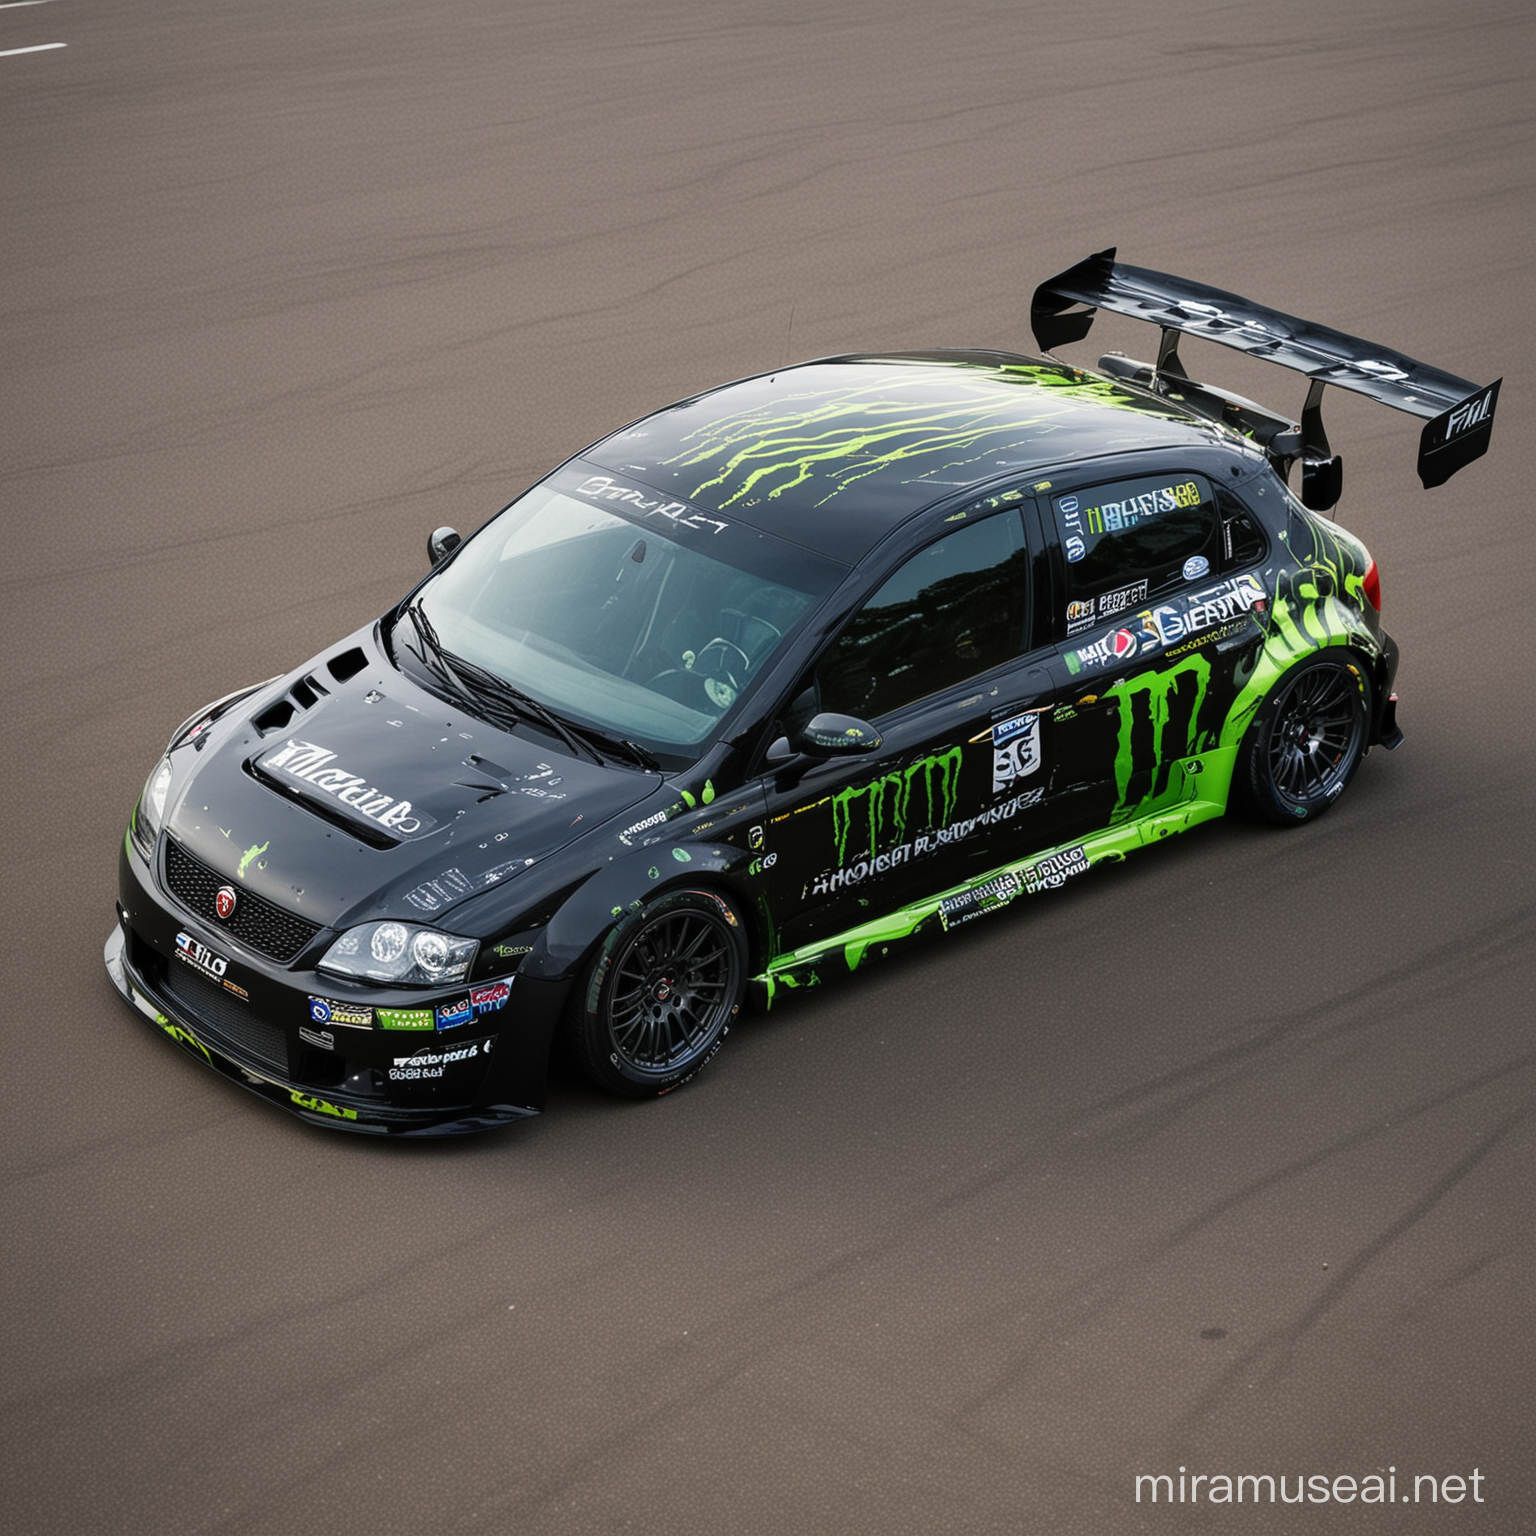 Customized Fiat Stilo Racing Car with Monster Energy Paint Job